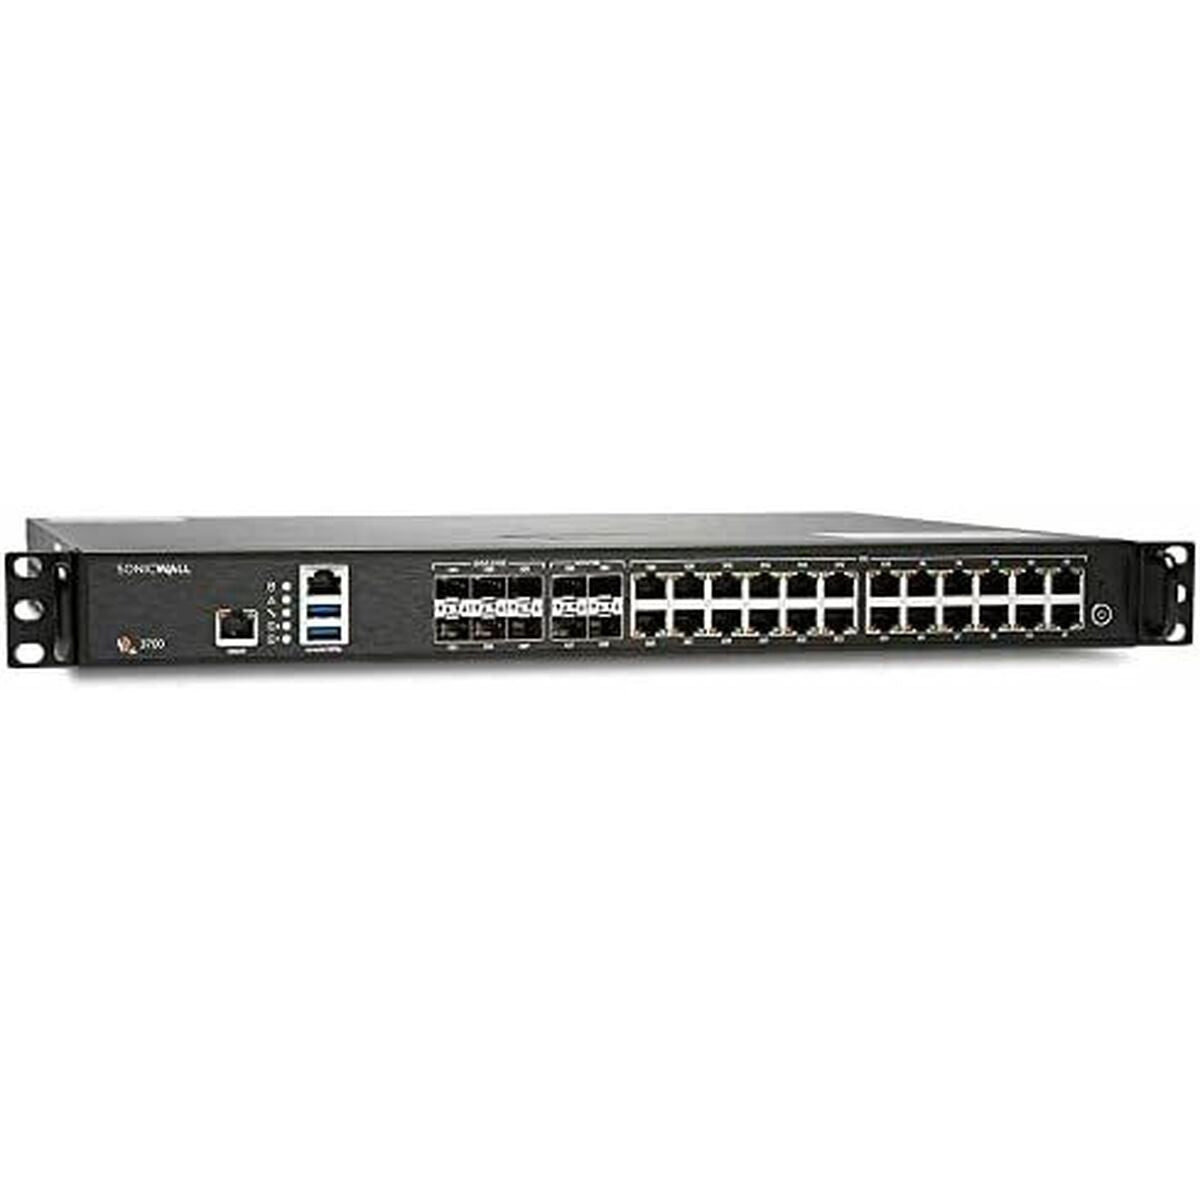 Firewall SonicWall 02-SSC-8060, SonicWall, Computing, Network devices, firewall-sonicwall-02-ssc-8060, Brand_SonicWall, category-reference-2609, category-reference-2803, category-reference-2826, category-reference-t-19685, category-reference-t-19914, category-reference-t-21371, Condition_NEW, networks/wiring, Price_100 - 200, Teleworking, RiotNook